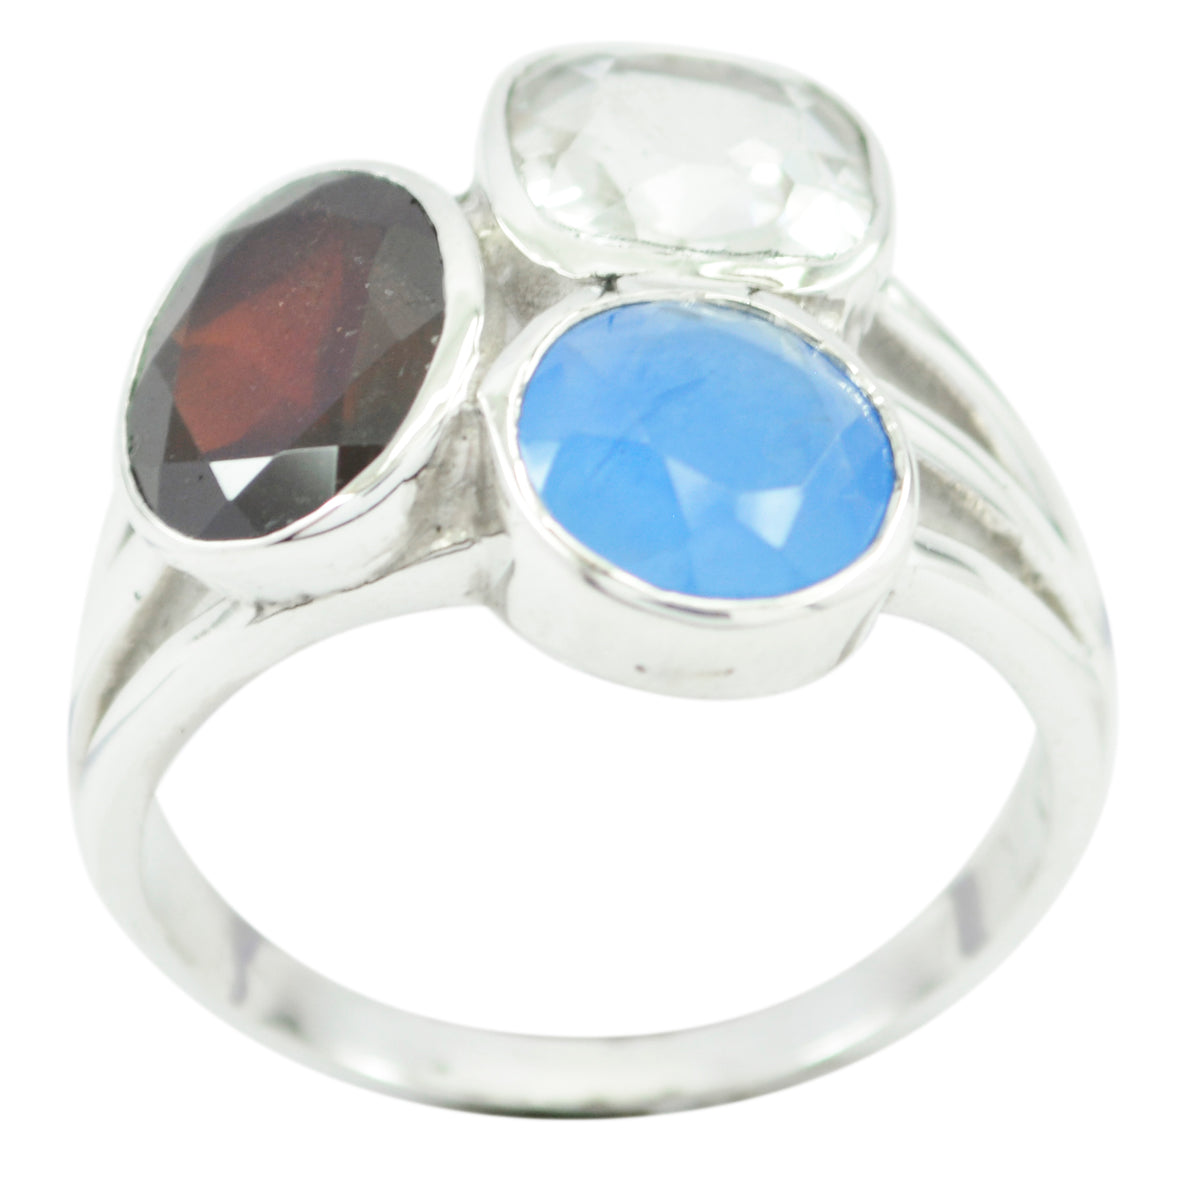 Well-Favoured Gem Multi Stone Silver Ring Best Place To Sell Jewelry